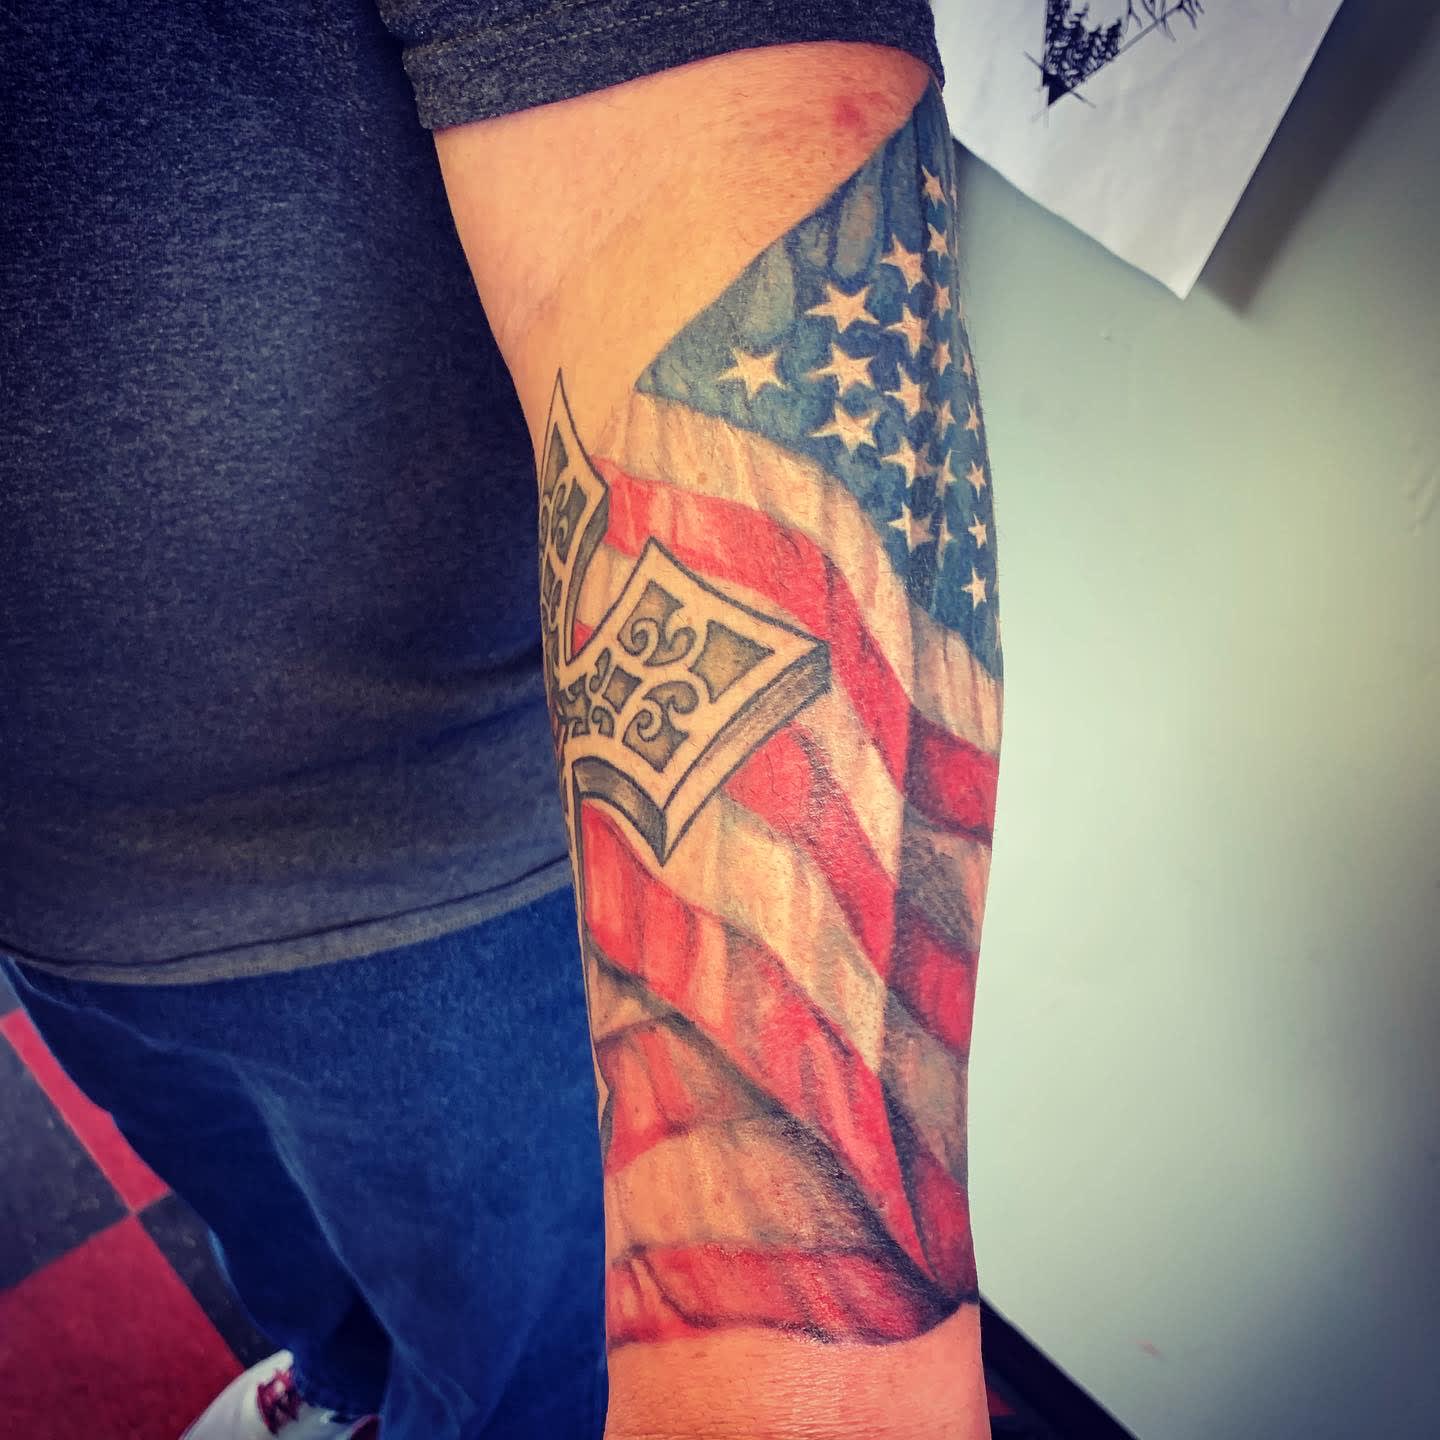 COUNTS TATTOO COMPANY on Instagram Sweet Flag mash up by Shane  countstattoos counts lasvegas lasvegastattooartist tattoos  lasvegastattooers lvt fy instagramtattoos